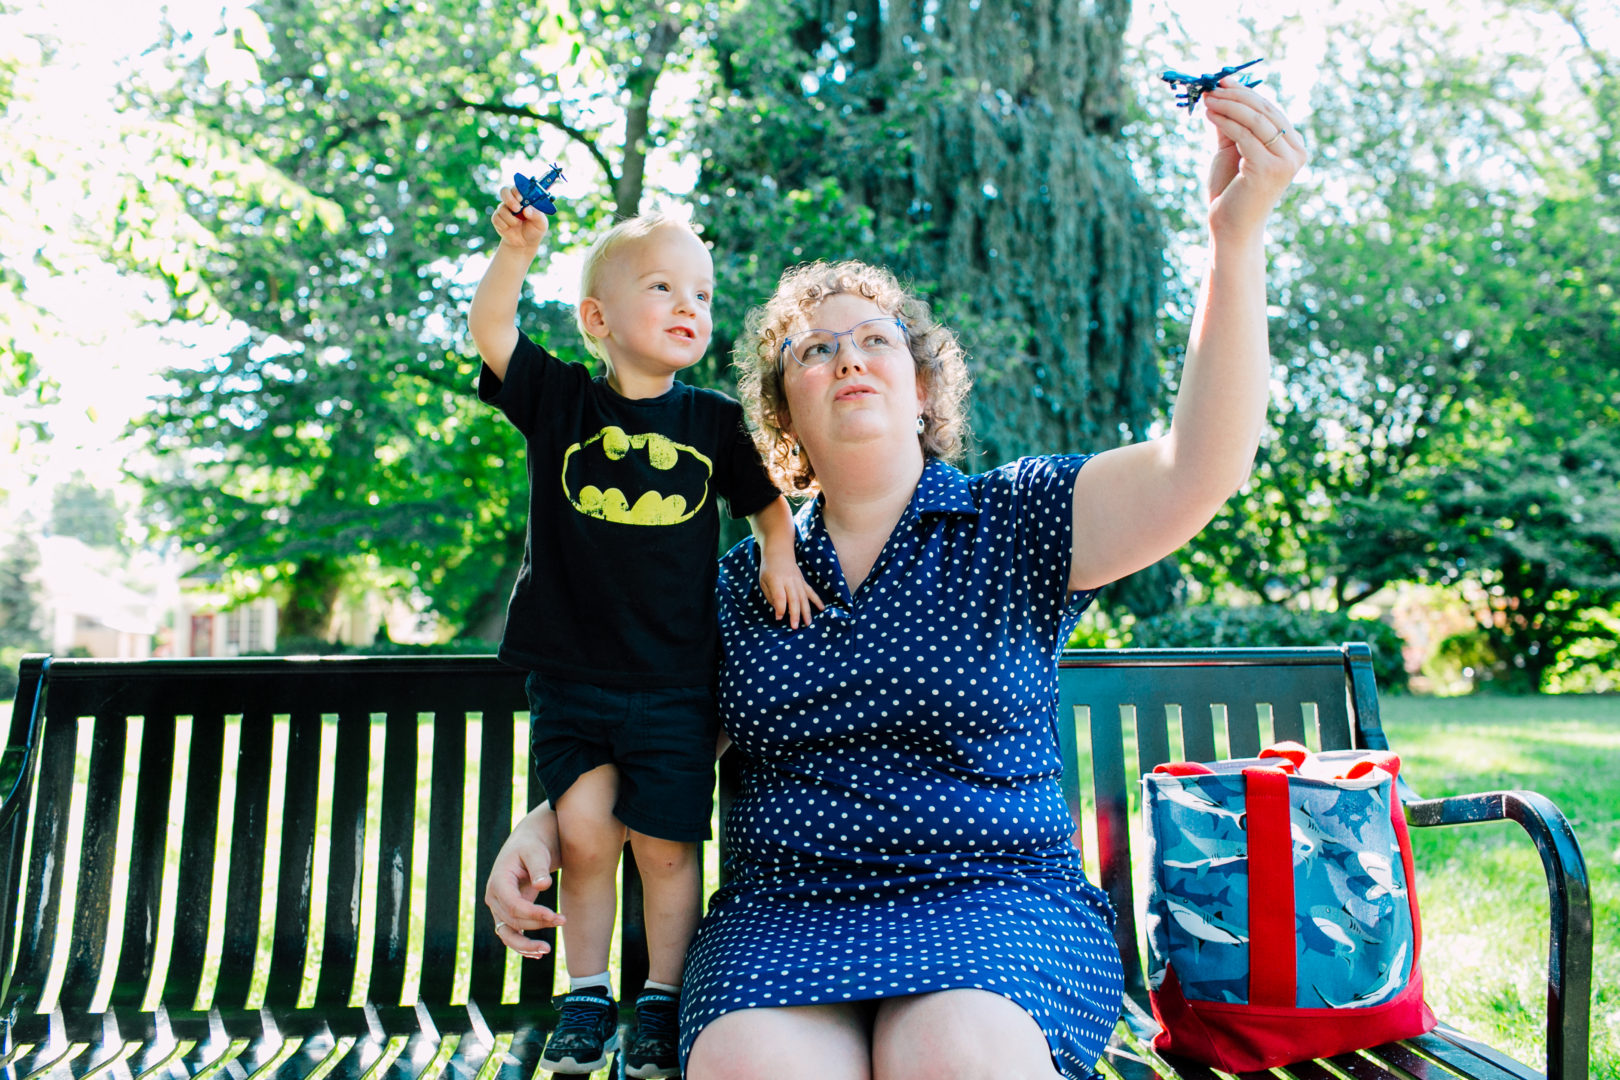 ovvo glasses mom playing airplanes with son elizabeth park